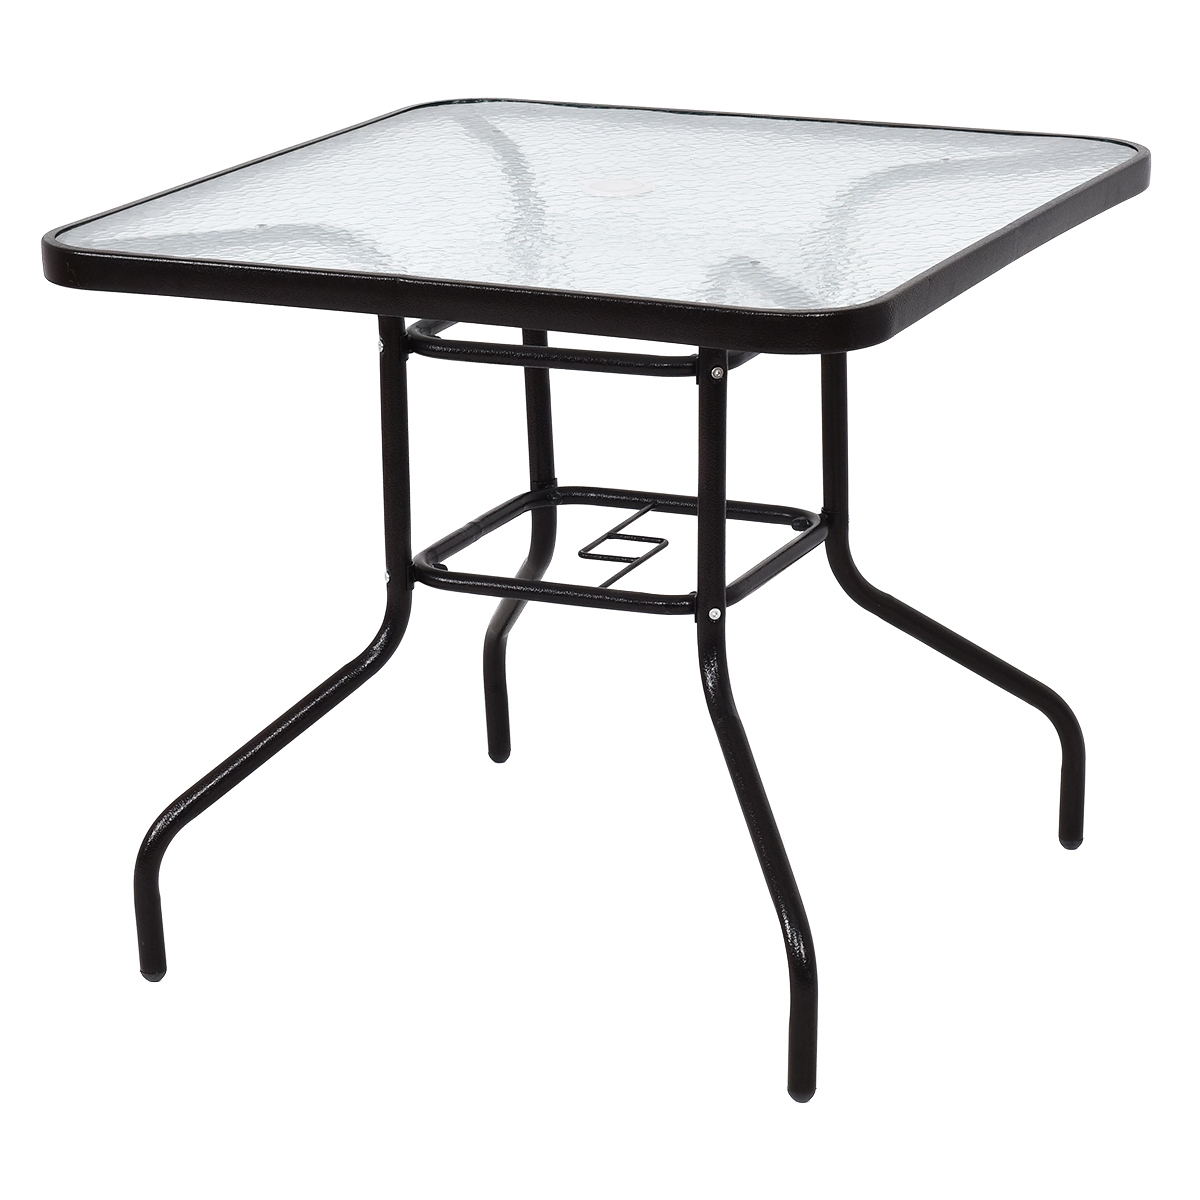 Topbuy 32" Patio Square Table Steel Frame Dining Table Patio Furniture Glass Top